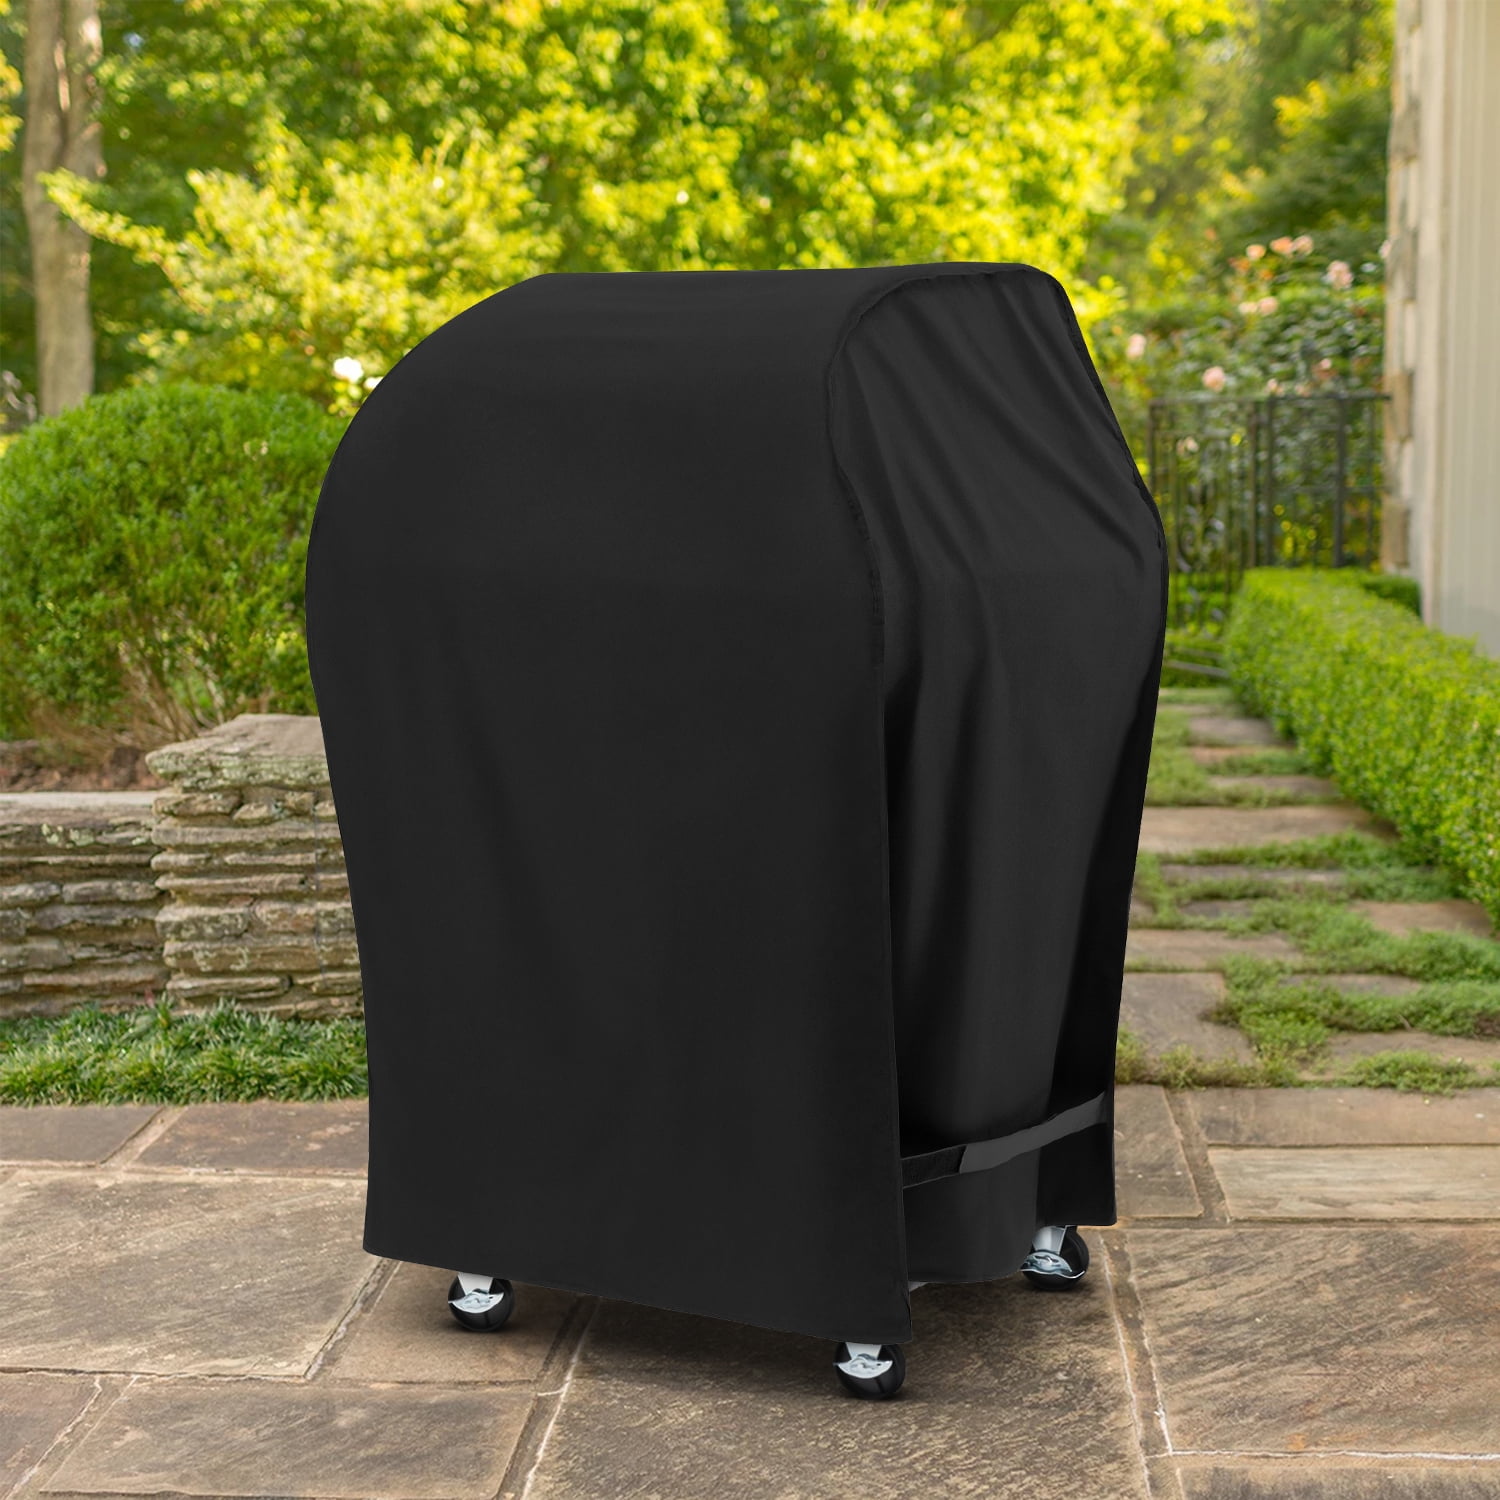 Unicook 2 Burner Gas Grill Cover 32 inch, Heavy Duty BBQ Cover, Compatible for Weber Char-Broil Nexgrill and More Grills with Collapsed Side Tables, Waterproof - Walmart.com